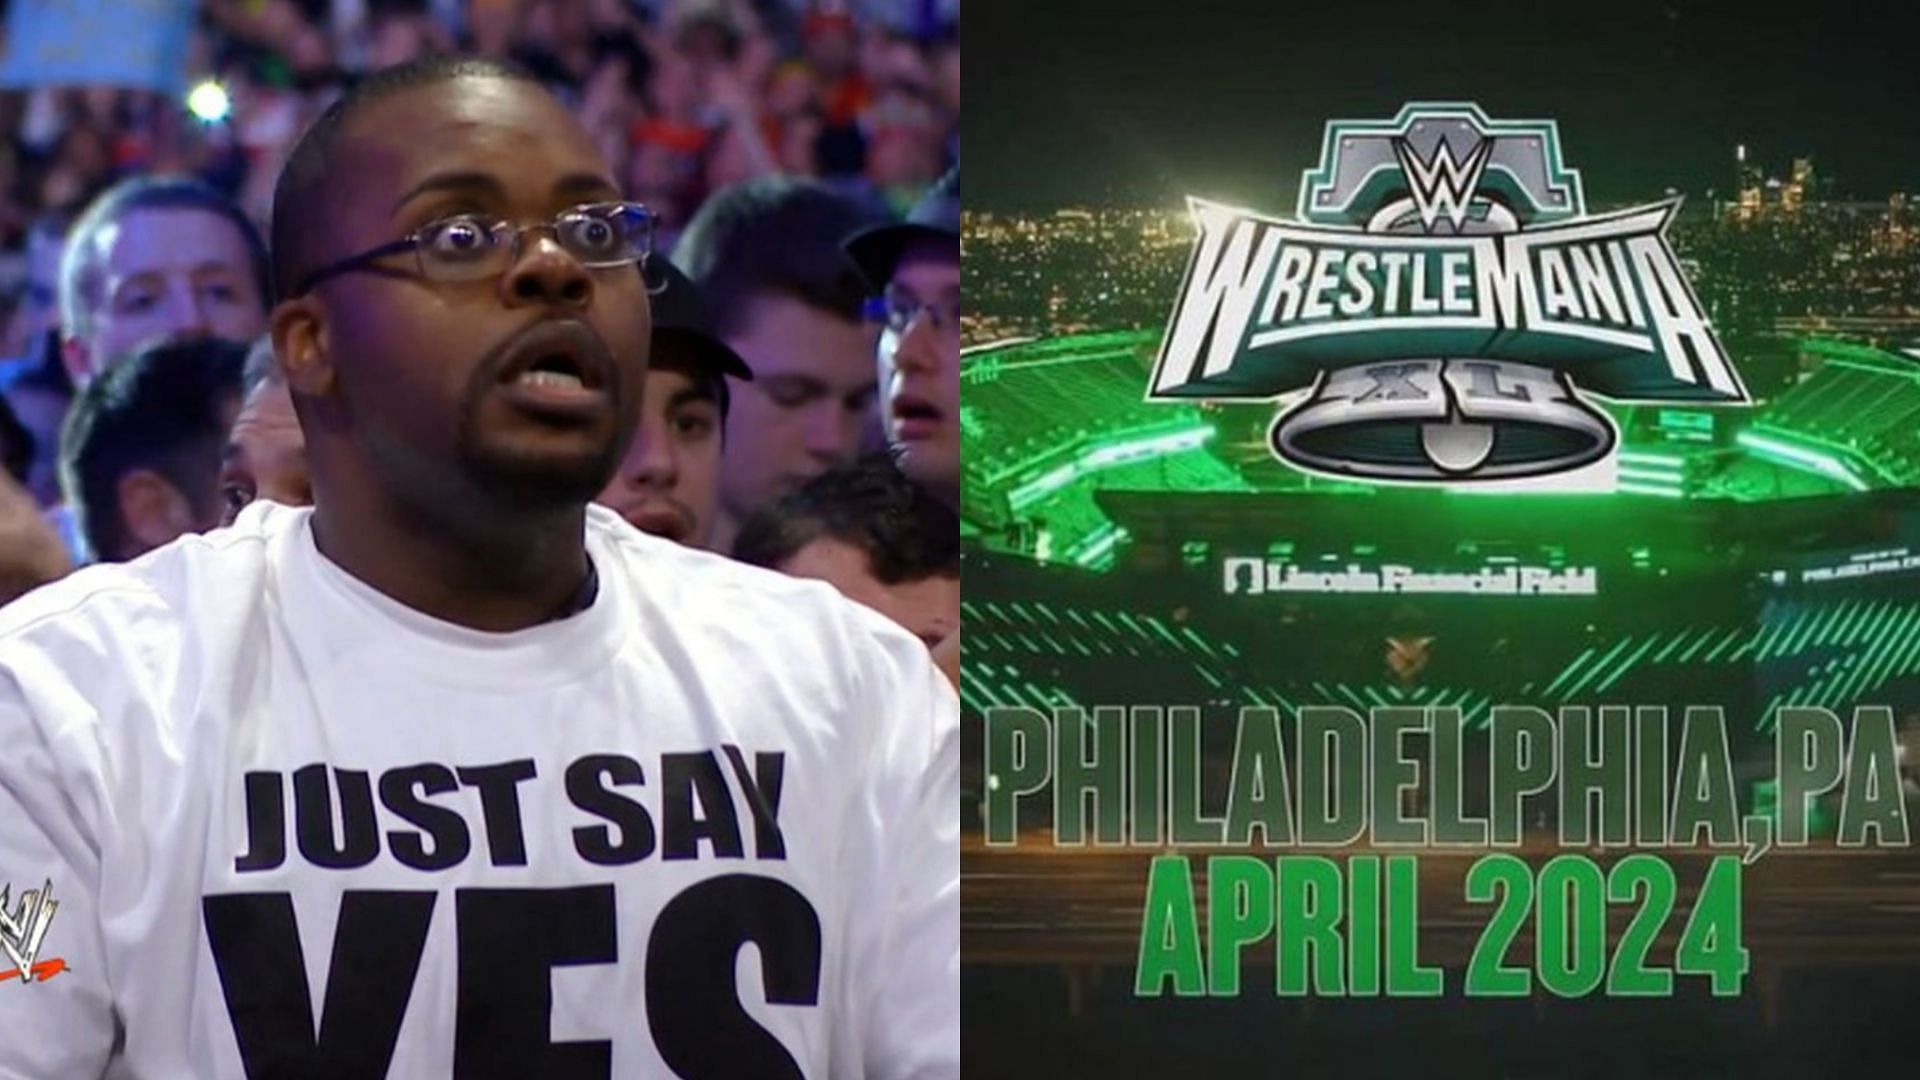 WWE WrestleMania 40 will be held at Lincoln Financial Field in Philadelphia